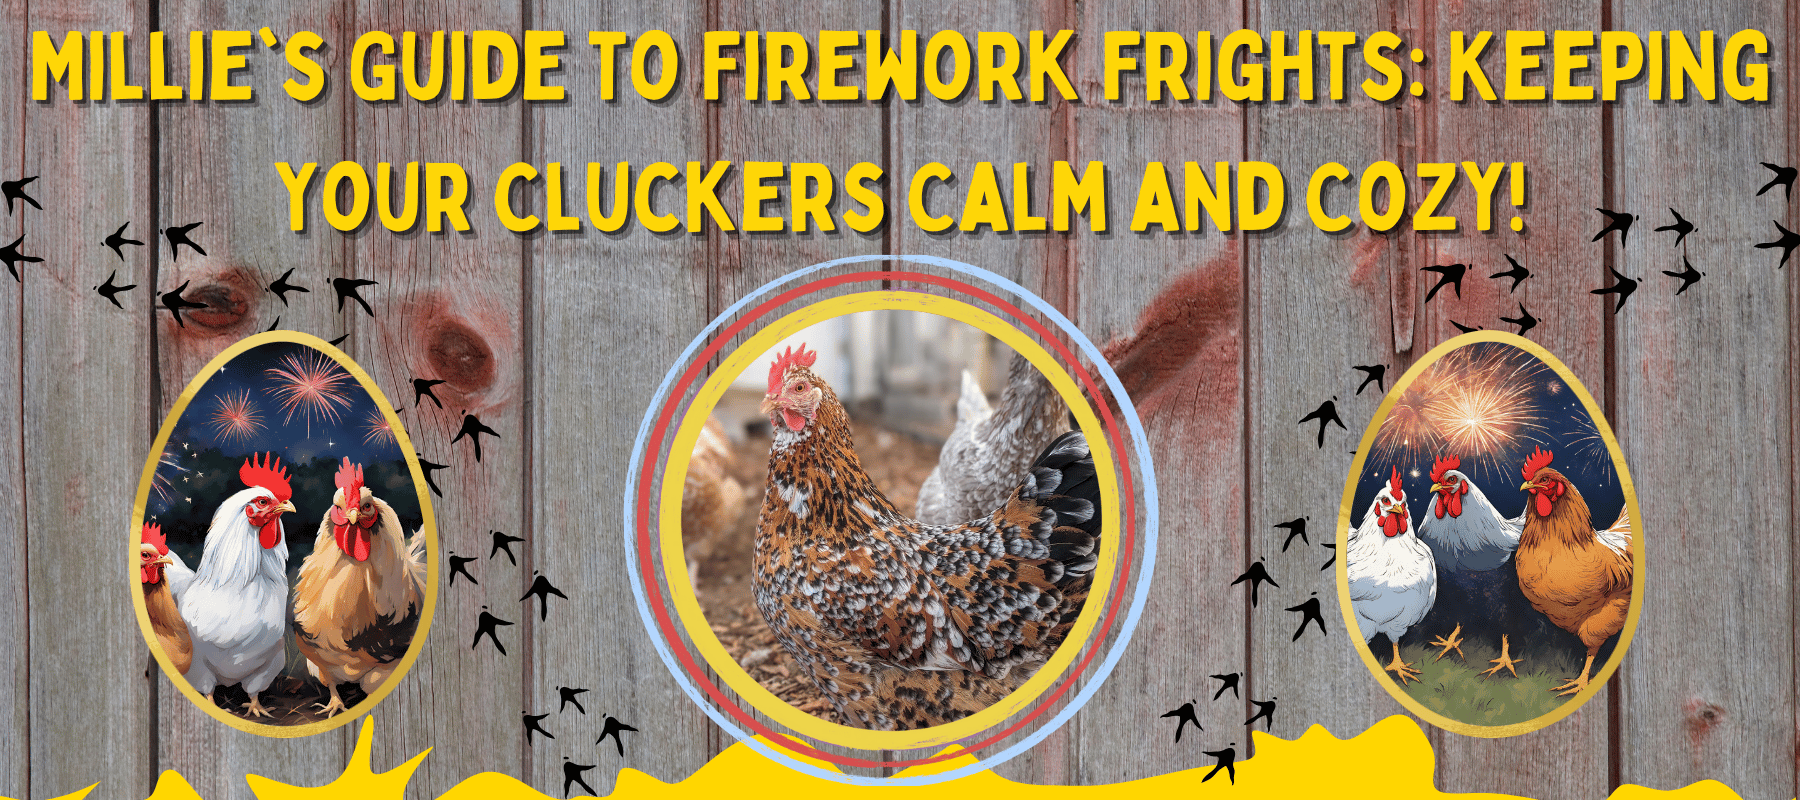 Millie's Guide to Firework Frights: Keeping Your Chickens Calm and Cozy